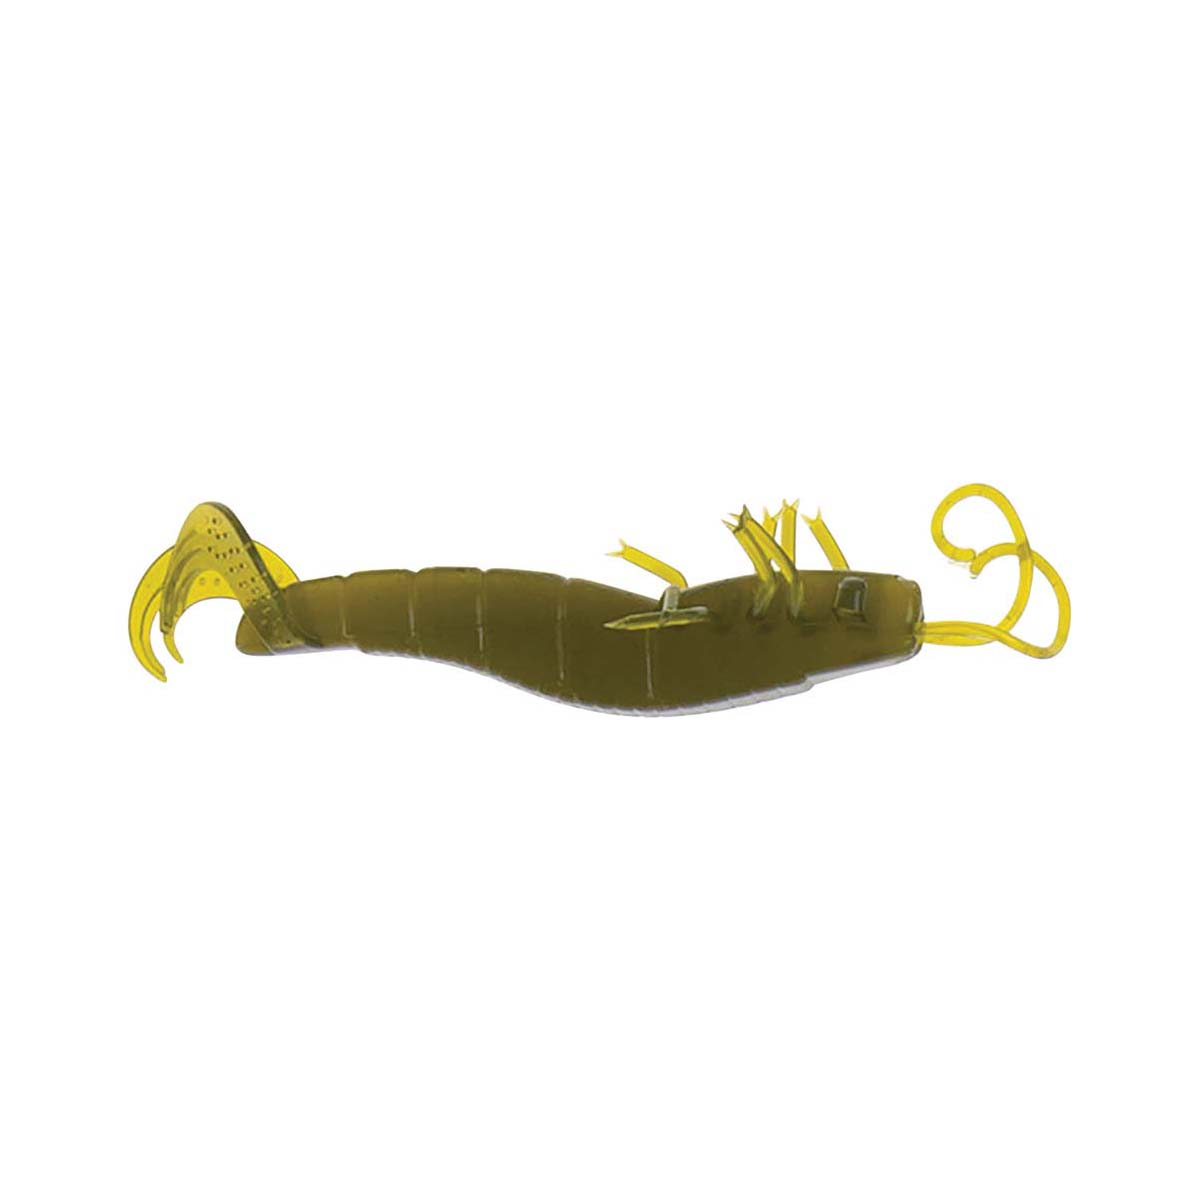 Atomic Plazos Prong Soft Plastic Lure 4in Avocado